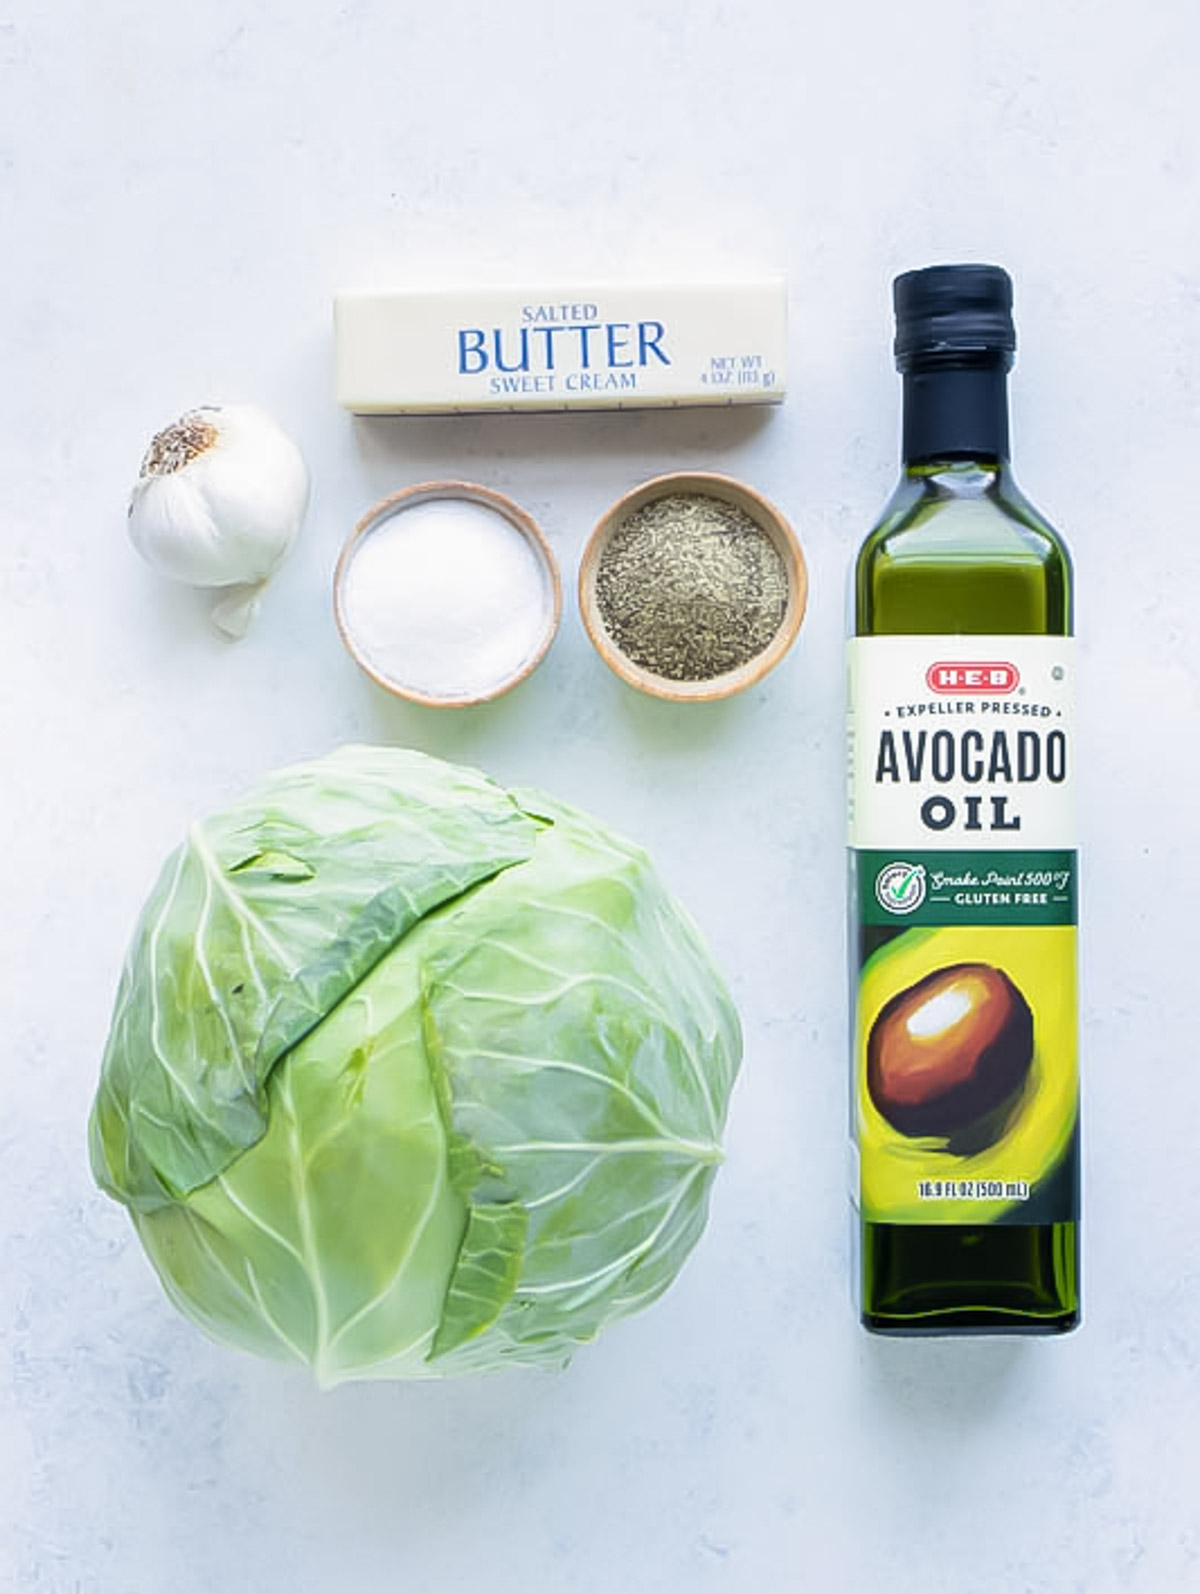 Sauteed cabbage ingredients on a cutting board